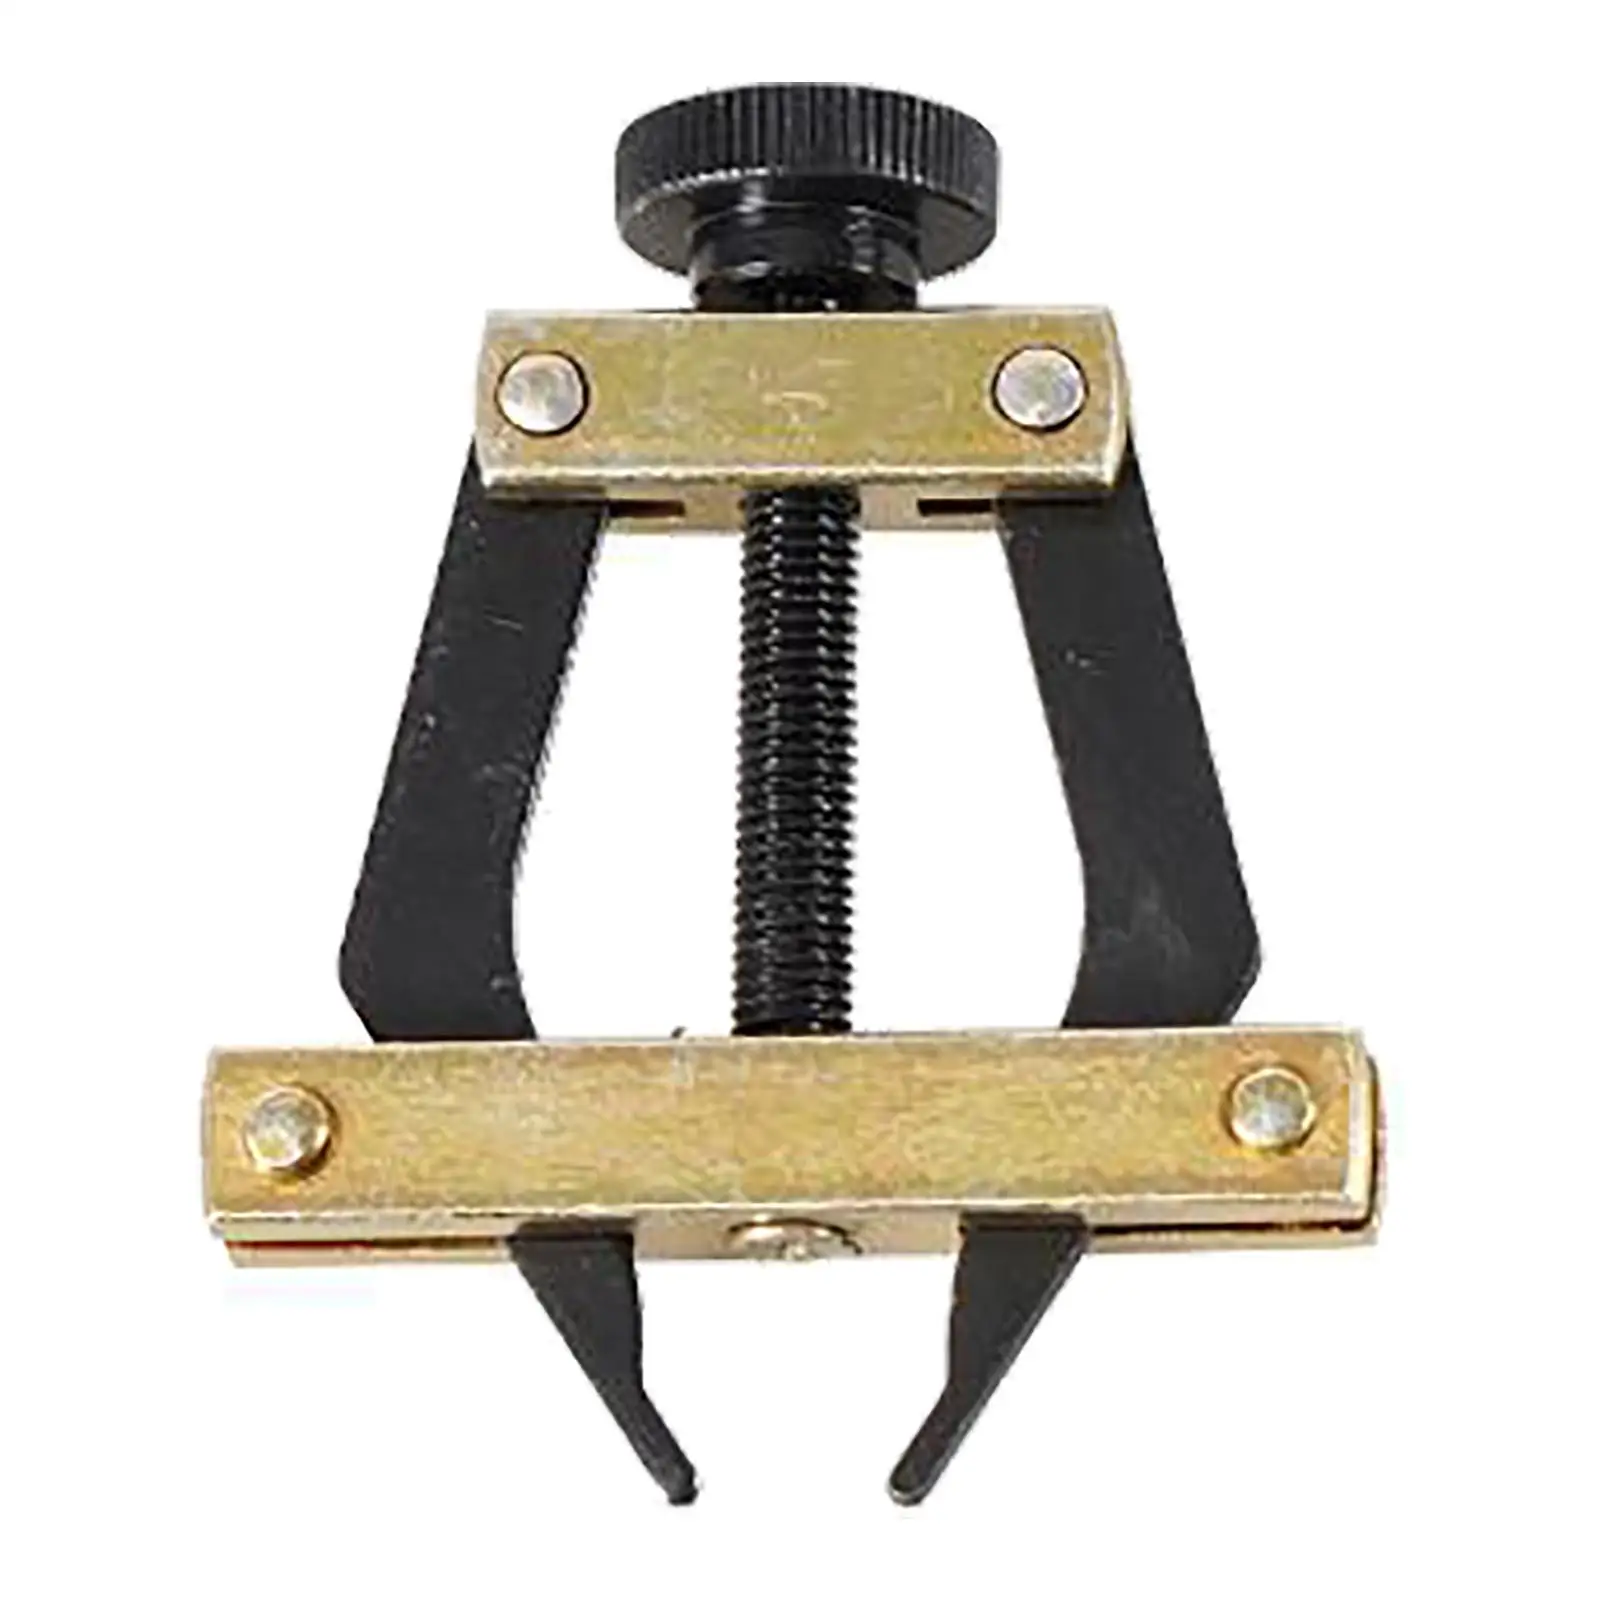 BROWNING 80-240 CHAIN PULLER FOR INSTALLING ROLLER CHAINS 